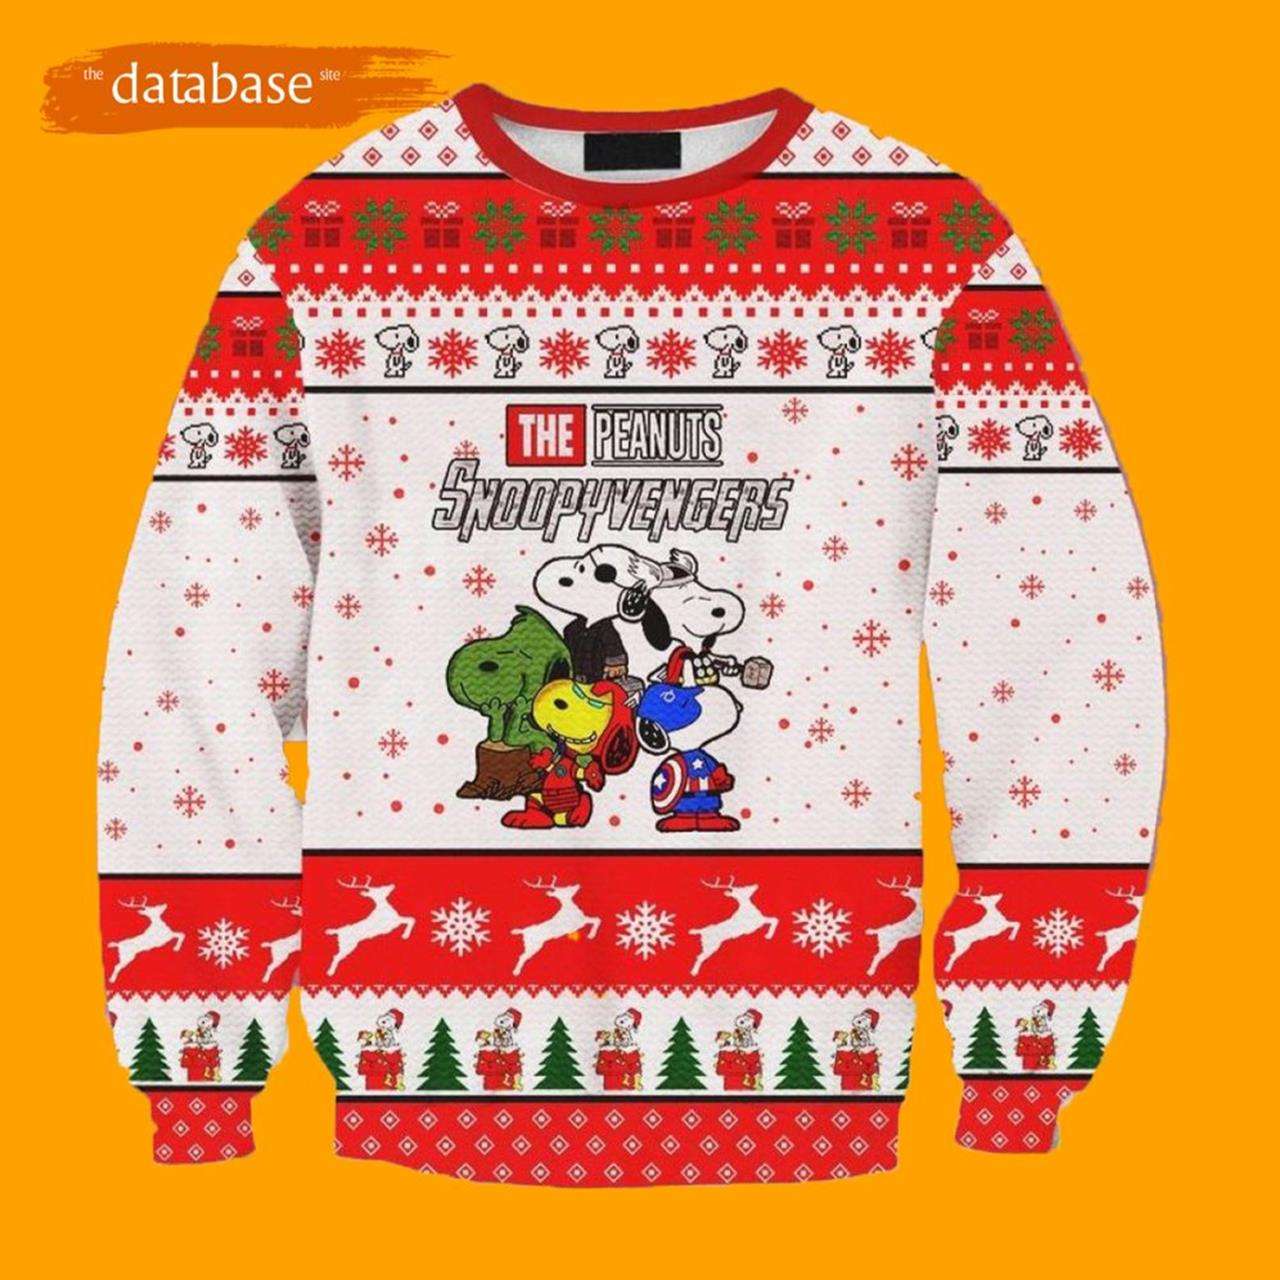 The Peanuts Snoopyvengers Snoopy Ugly Christmas Sweater